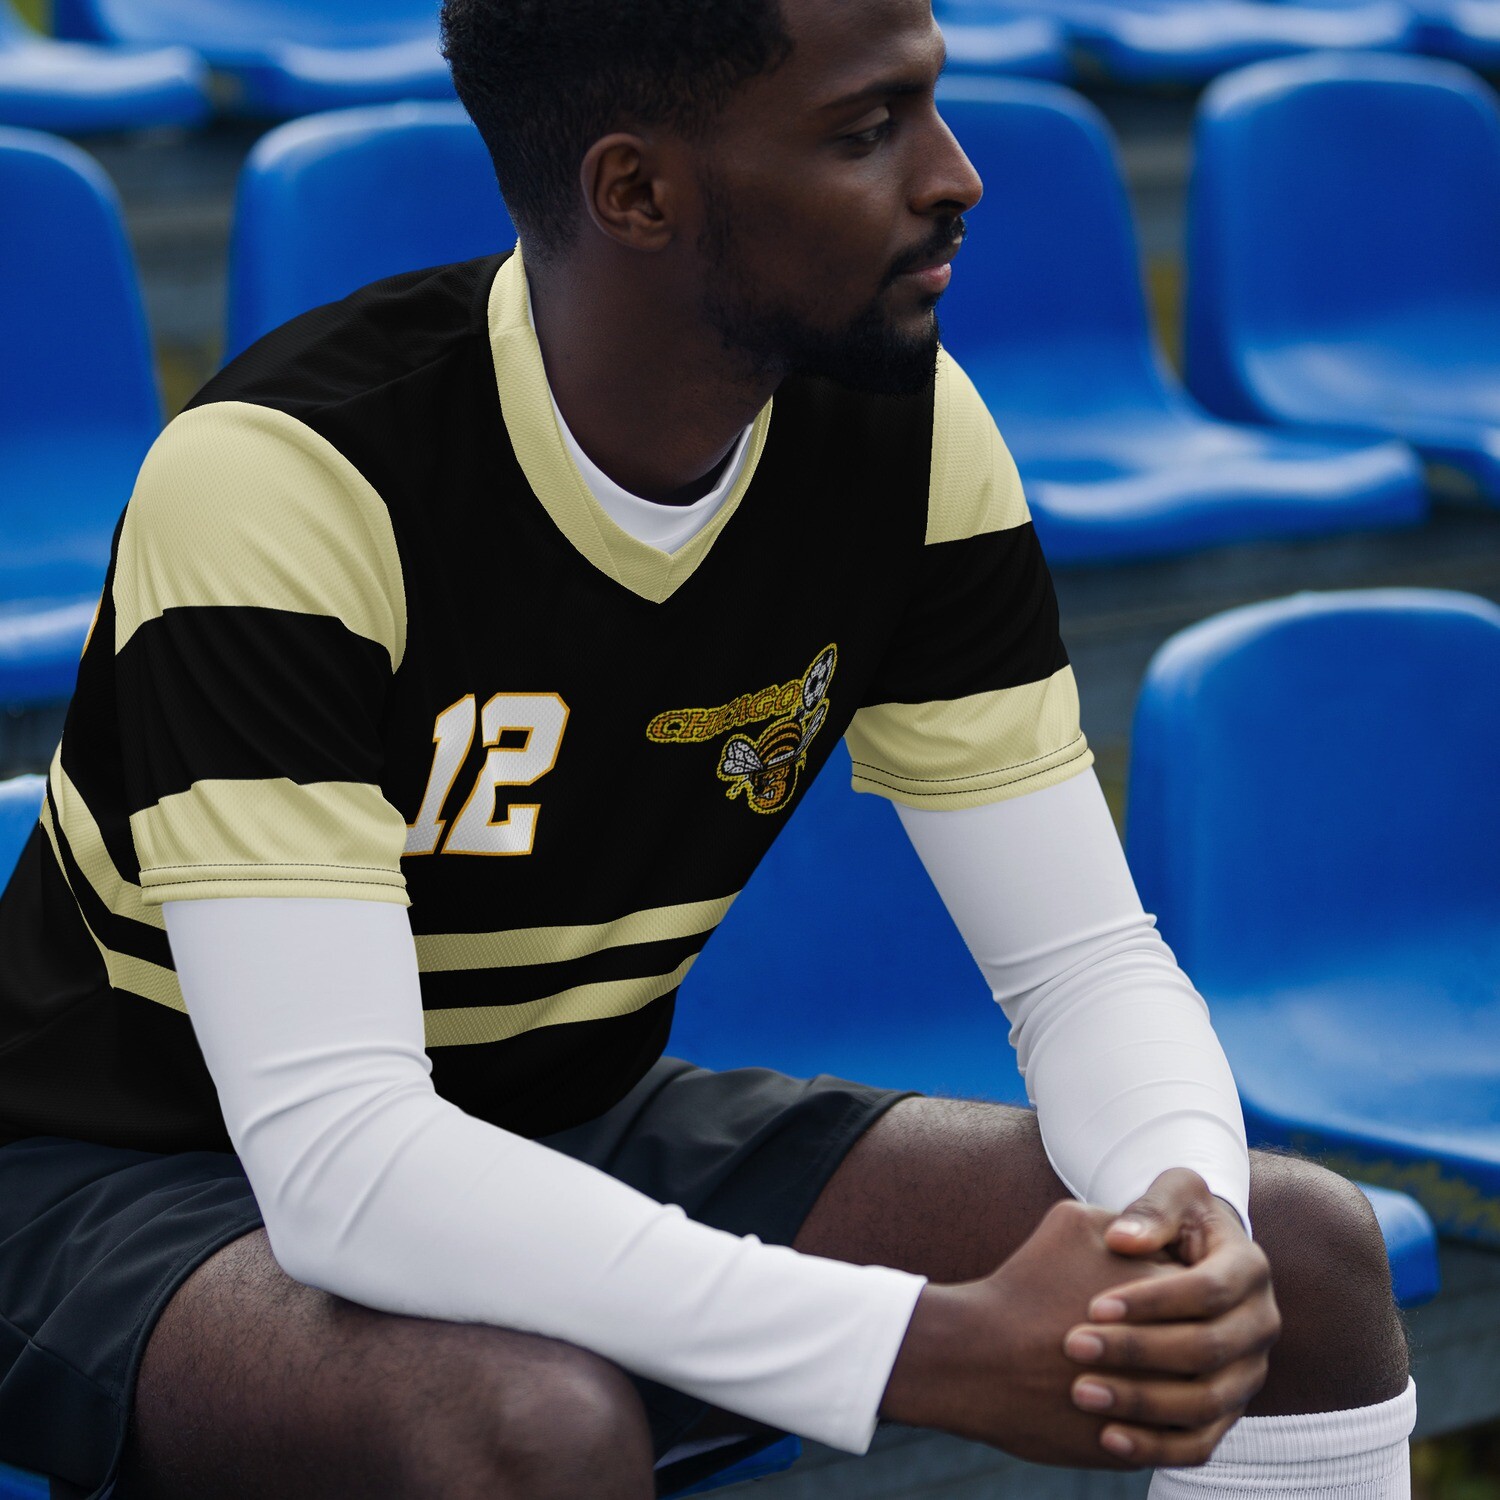 Official Chicago Sting™ Stylo Matchmakers® NASL™ Number 12 Granitza Recycled Soccer Jersey